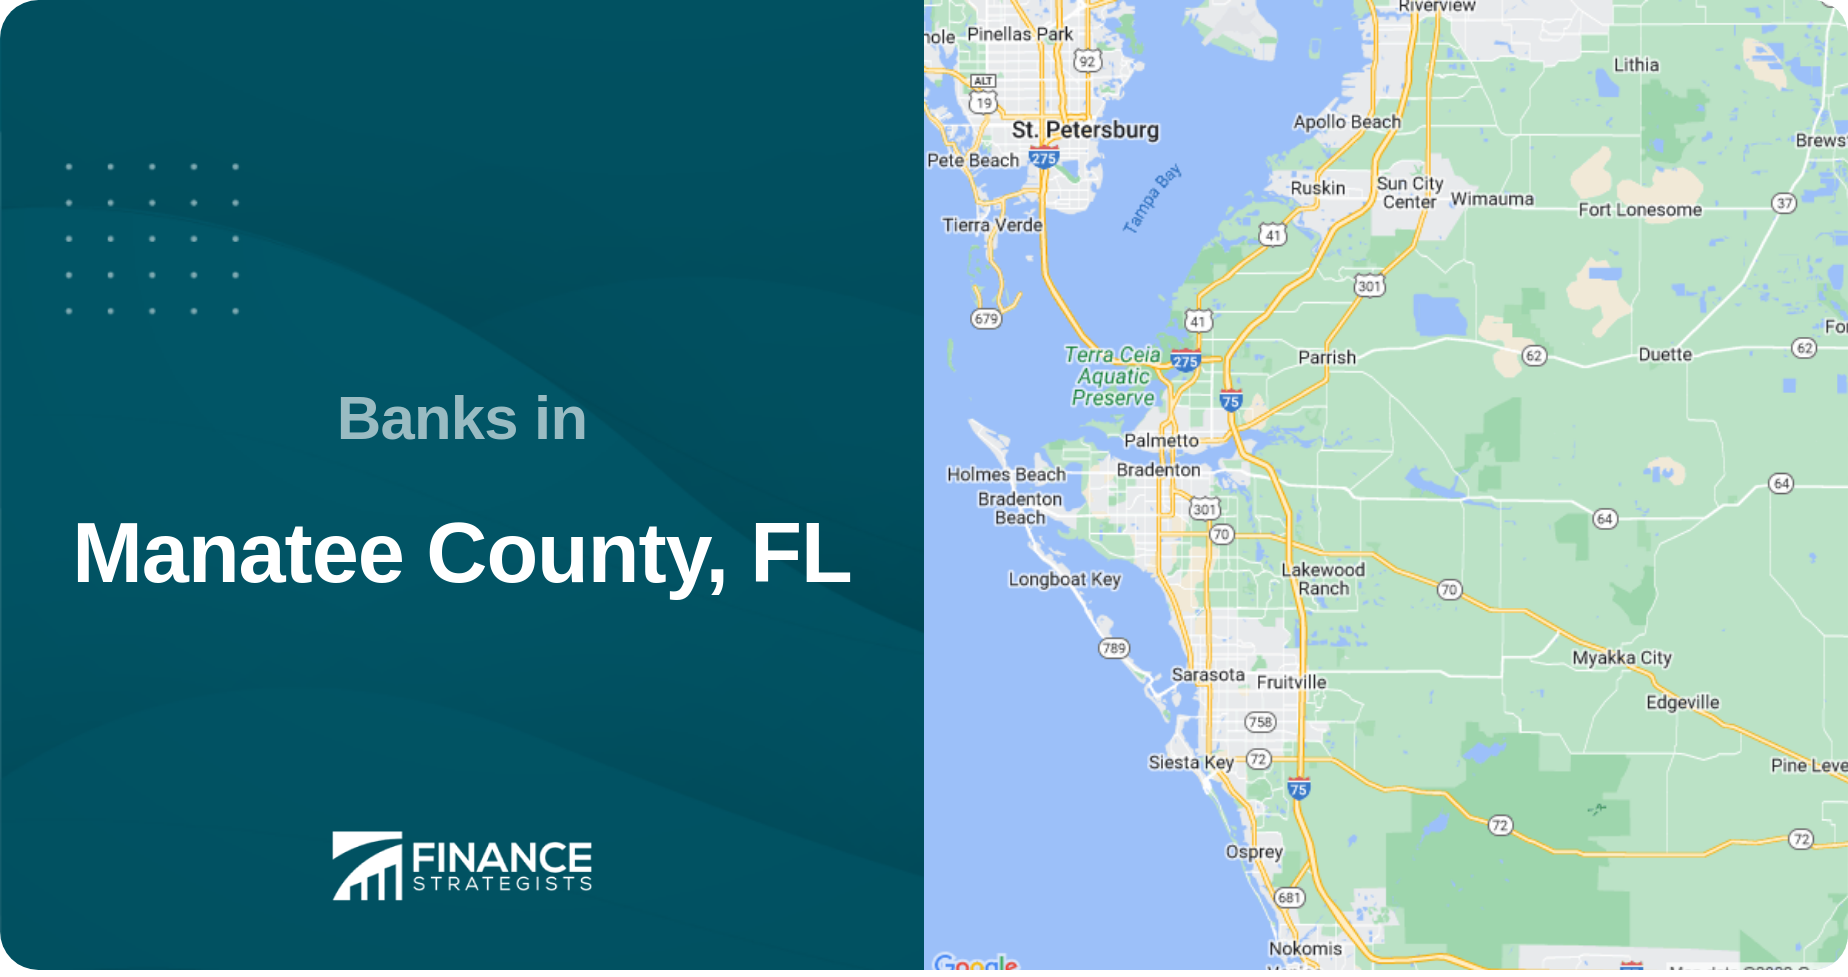 Banks in Manatee County, FL